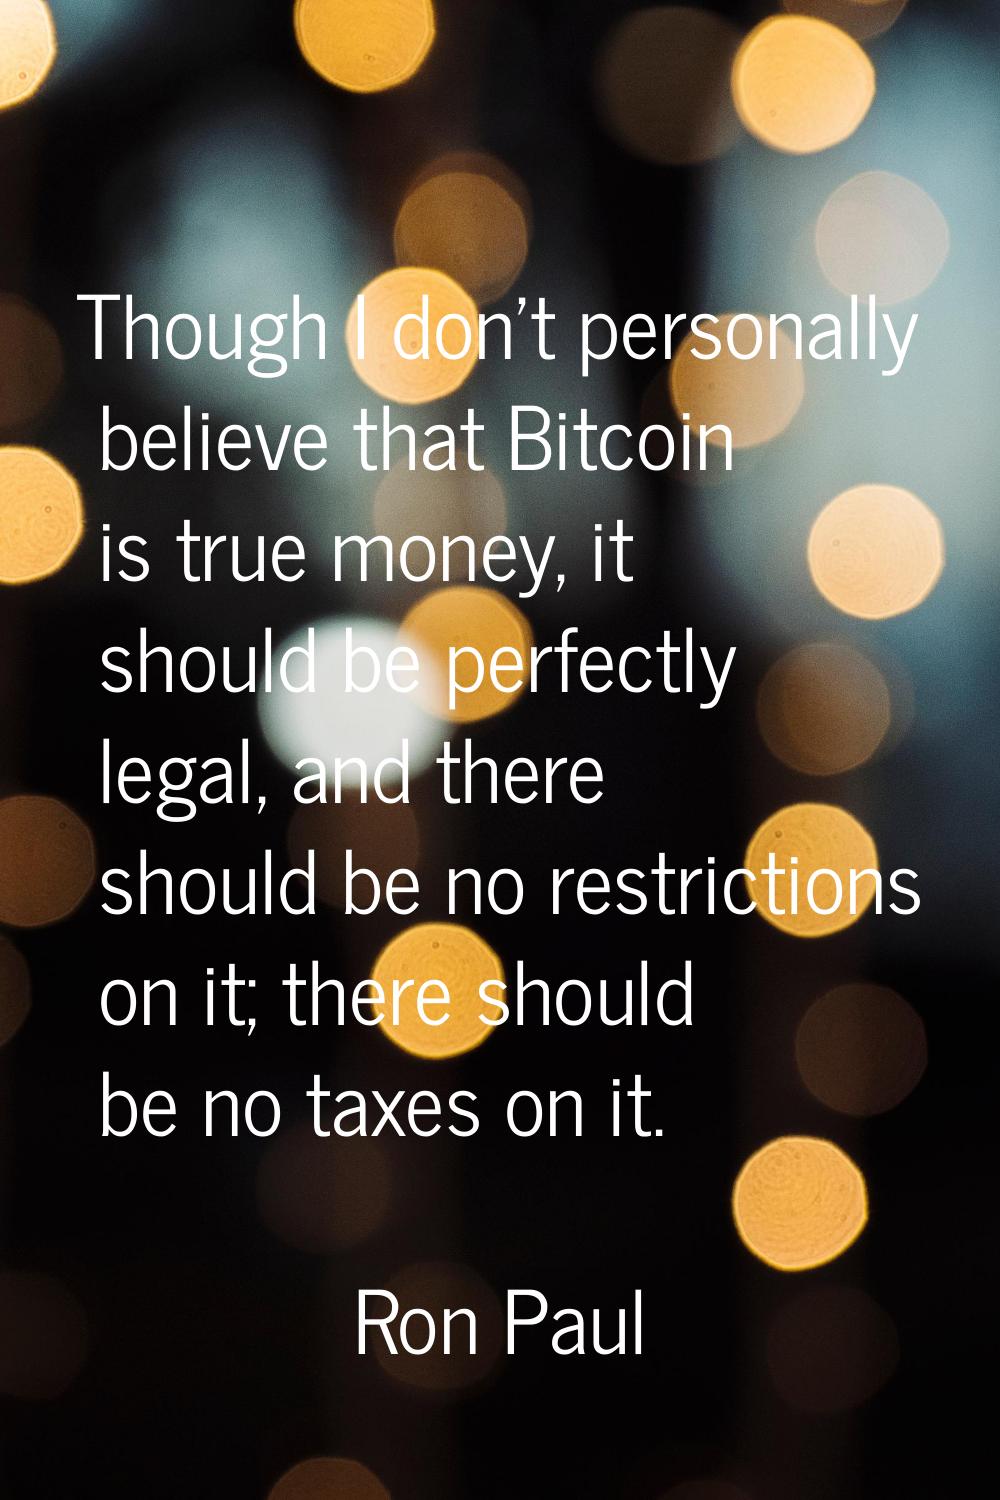 Though I don't personally believe that Bitcoin is true money, it should be perfectly legal, and the